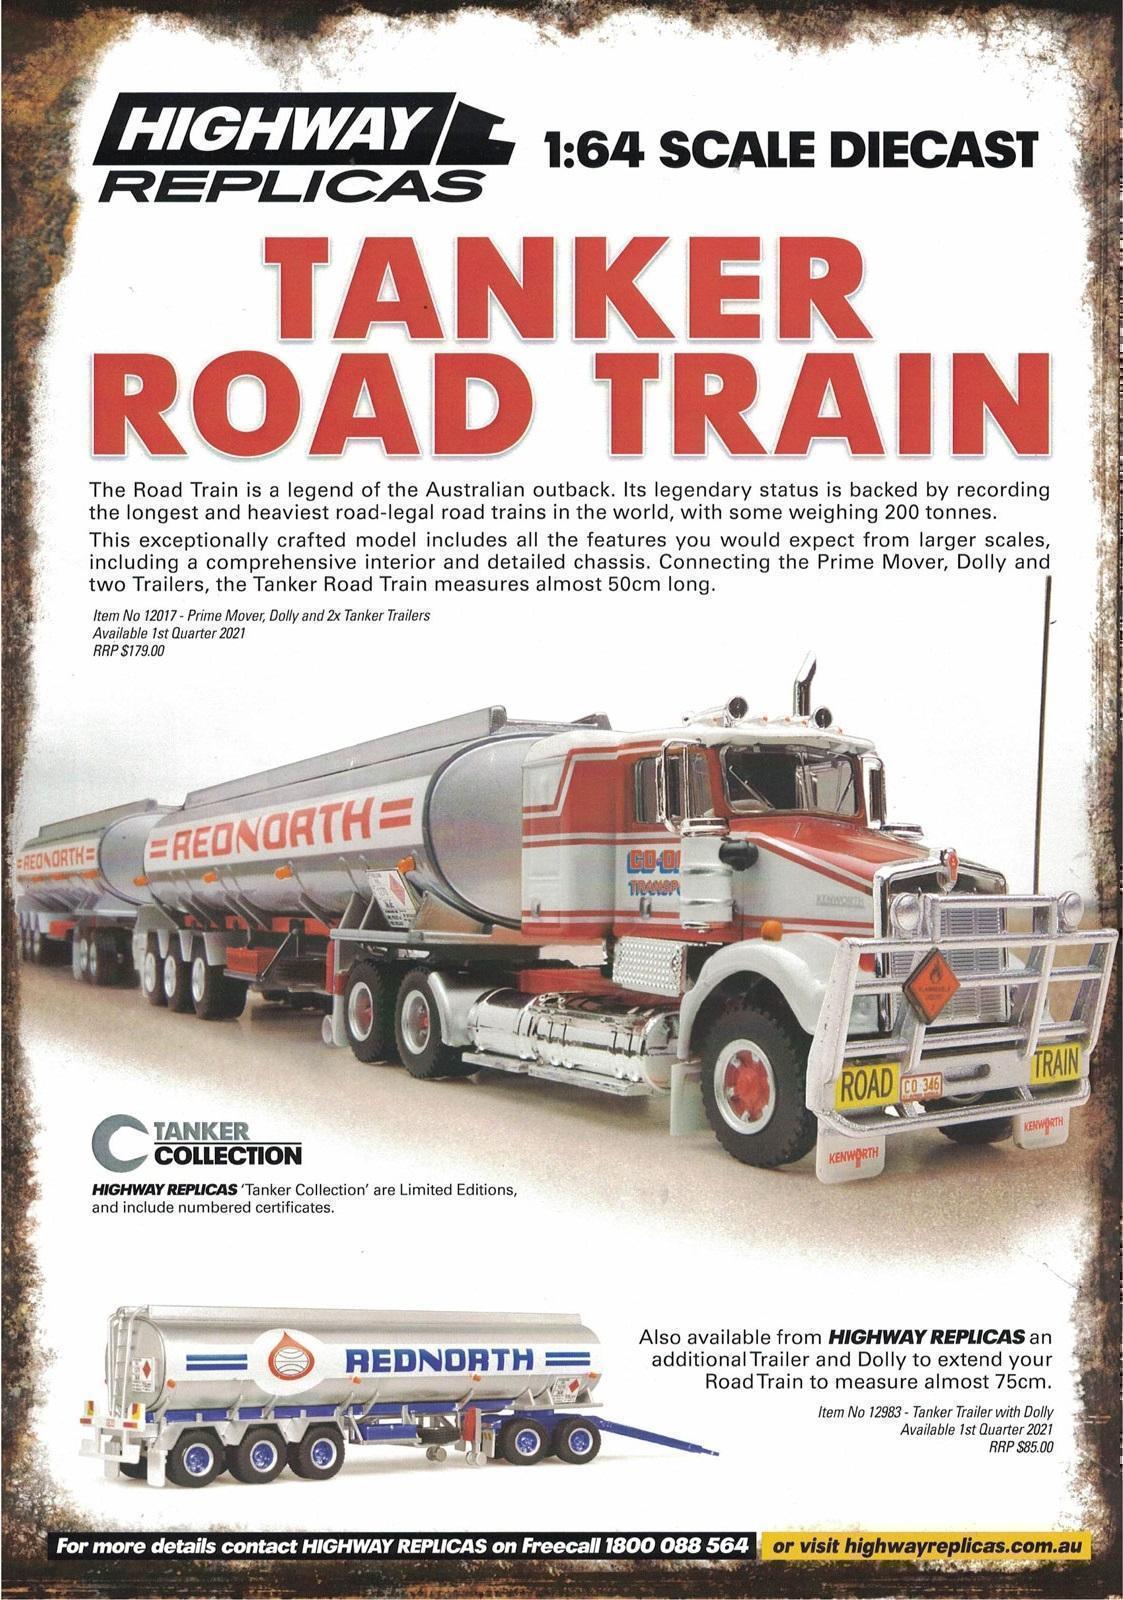 PRE ORDER - Highway Replicas Rednorth **TWO Red & ONE Blue Trailers** Tanker Road Train Die Cast Model Truck With Additional Trailer & Dolly 1:64 Scale (FULL PRICE - $248.00)